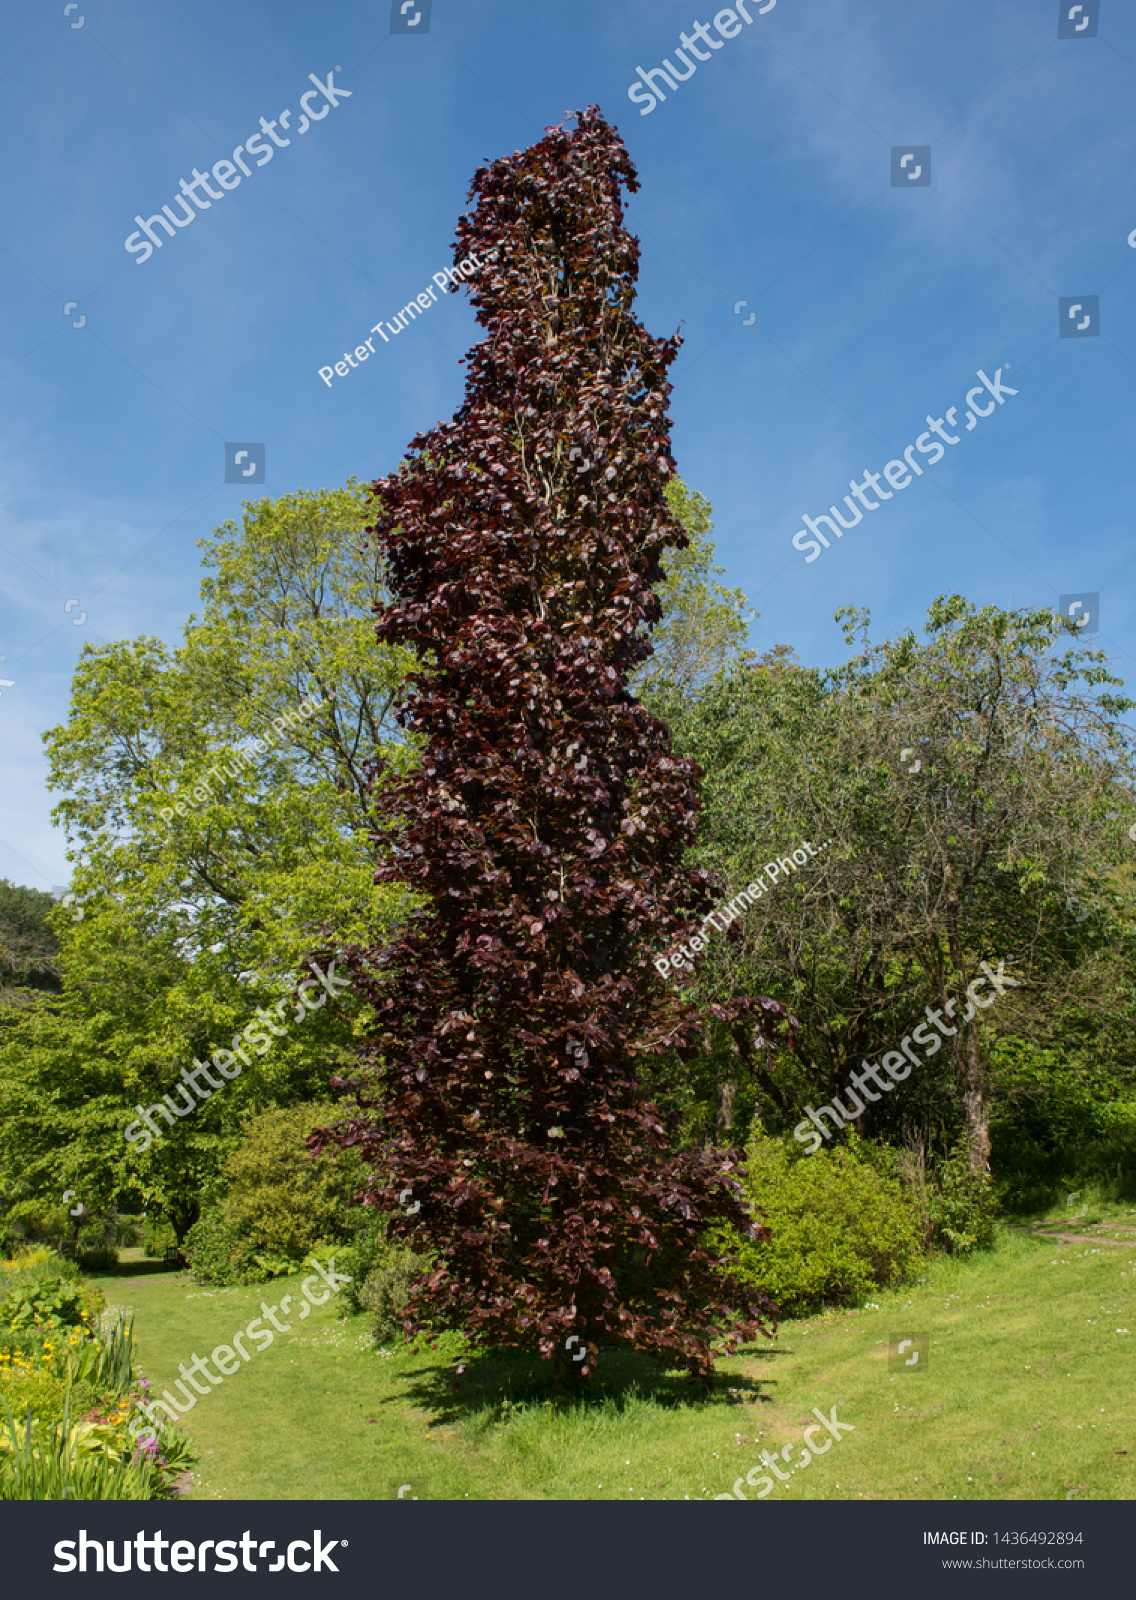 Spring Foliage of Dawyck Purple Beech Tree (Fagus sylvatica) in a Country Cottage Garden in Rural Devon, England, UK #1436492894